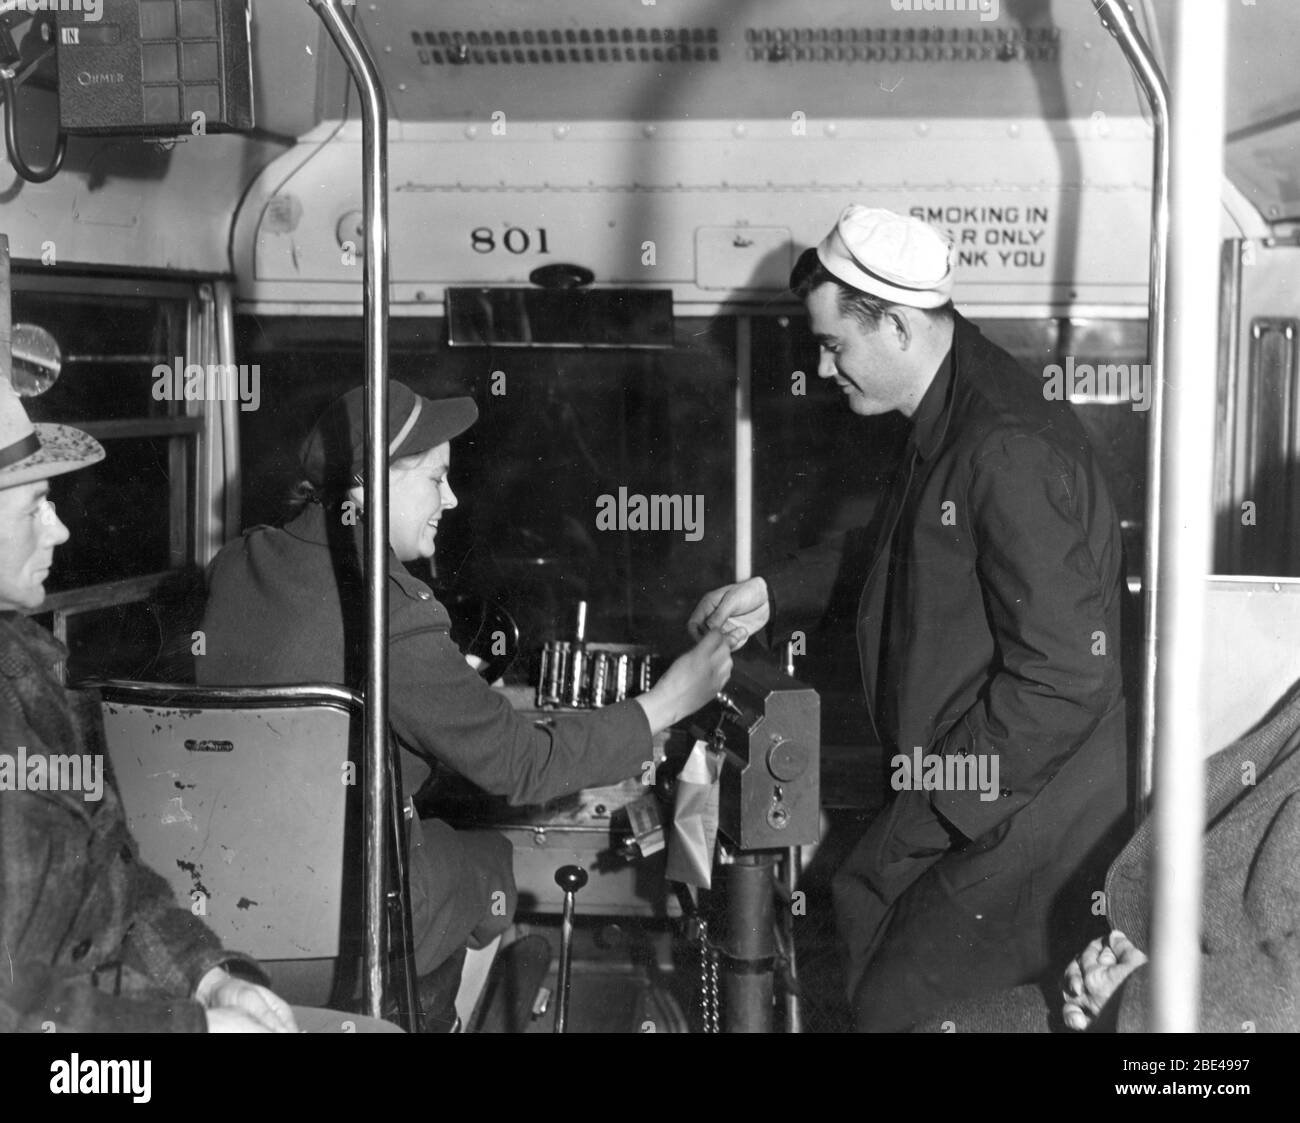 "Women in Essential Services - Women bus drivers help expedite America's transportation problems (February 1943)"  So says the text on Ms. Ann Rosener's photograph, taken for the "Office of War Information."  A fine example of how our nation's women took over countless jobs left empty by men gone to war. Before WW II, women simply did Not drive city buses. Note the stacks of coins, ready to provide change for passengers, such as the friendly sailor paying our happy lady driver. Note sign, "Smoking in Rear Only. Thank you."   To see my other transport images, Search:  Prestor vintage vehicle Stock Photo